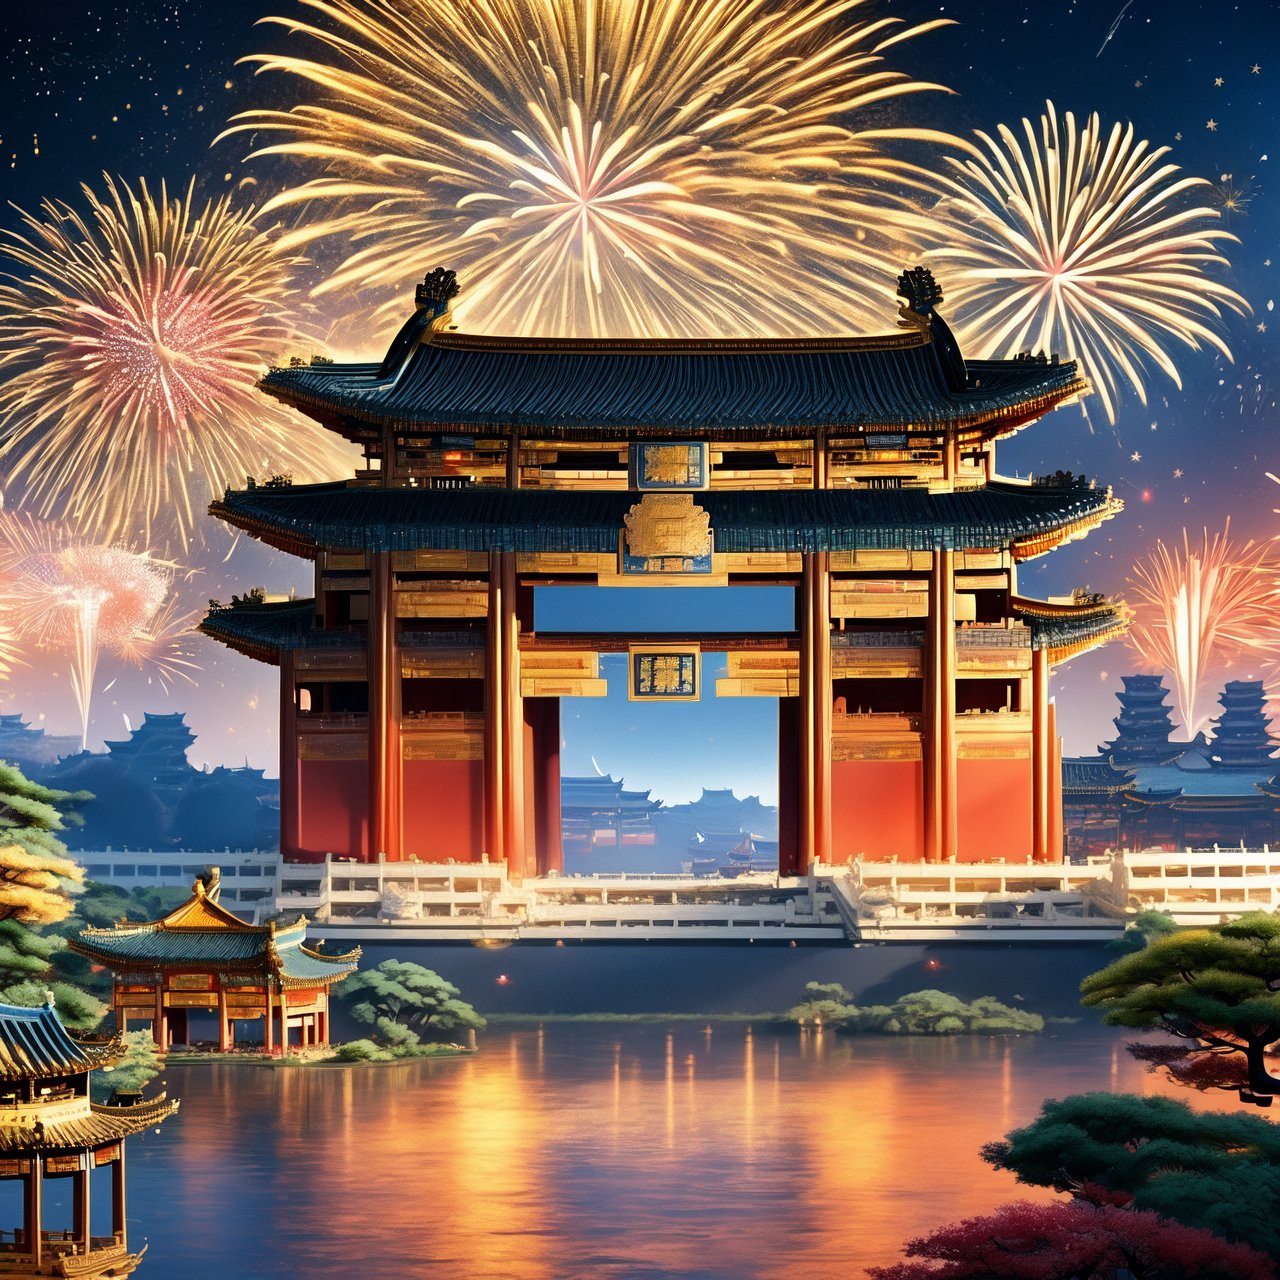 Masterpiece, high quality:1.5, 64K resolution, HDR, a grand and majestic golden Chinese palace under a starry night sky, vibrant fireworks illuminating the scene, intricate architectural details, rich cultural ambiance, panoramic view, (golden Chinese palace:1.4), (night sky with fireworks:1.3), epic scale.,Golden Chinese Dragon